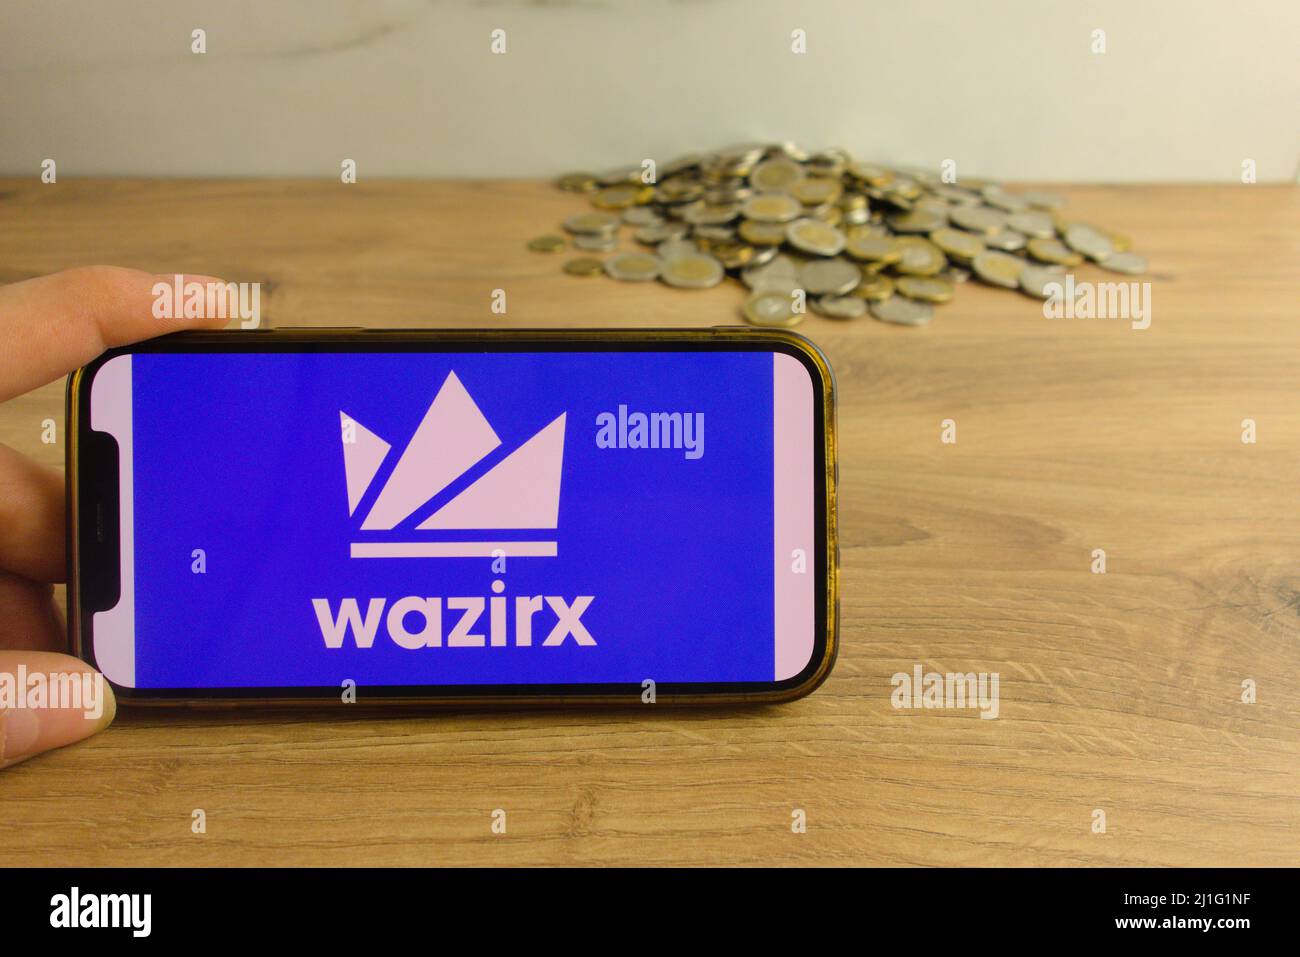 KONSKIE, POLAND - March 20, 2022: WazirX cryptocurrency exchange logo on mobile phone. Online trading, blockchain technology concept Stock Photo